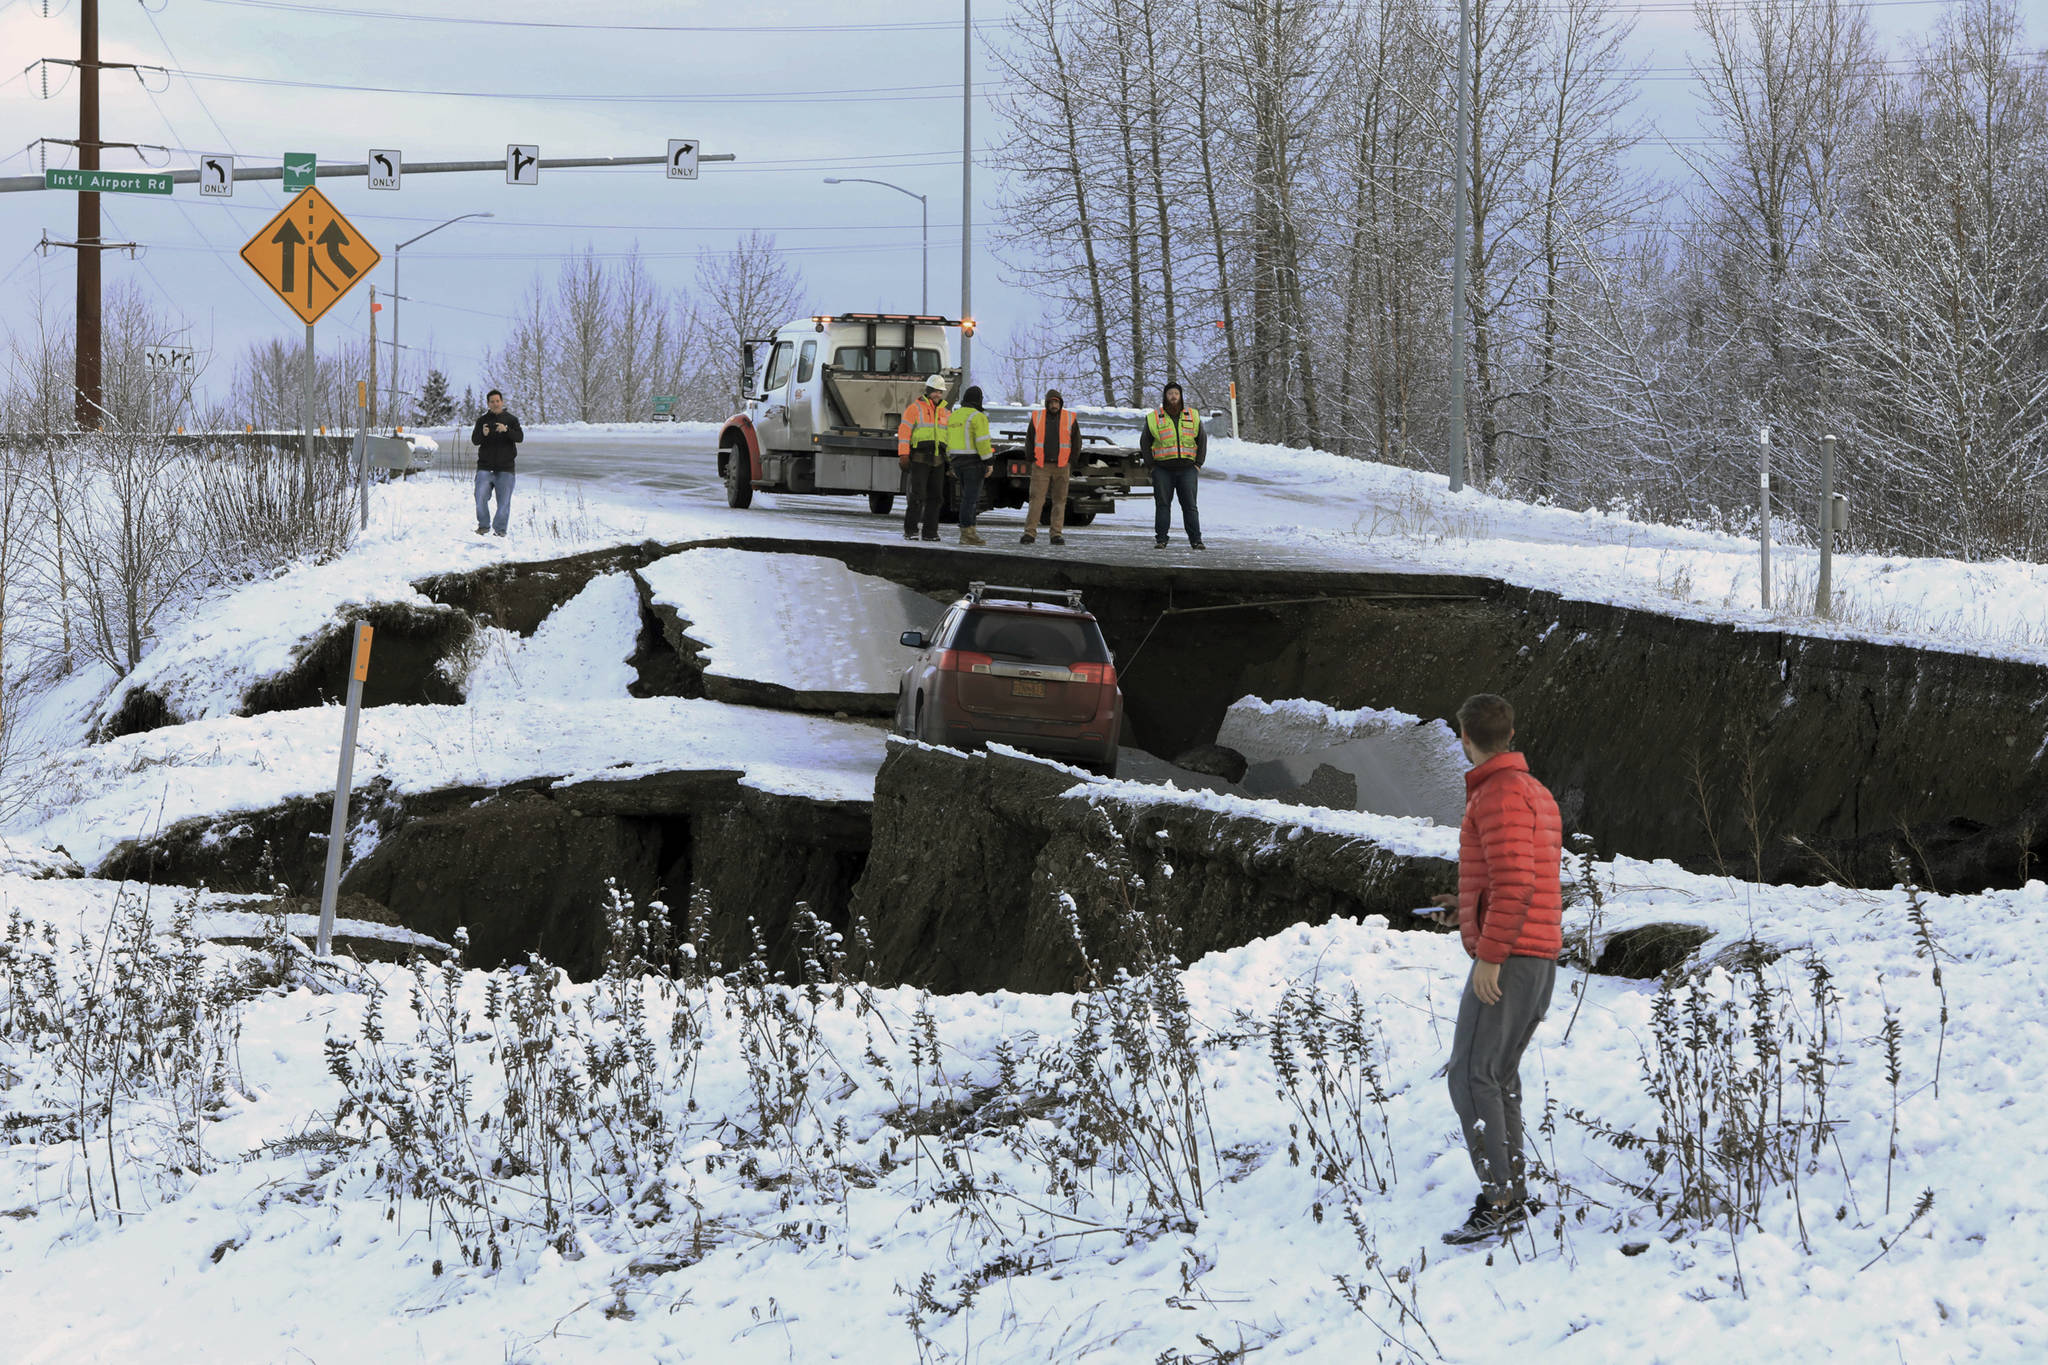 Highway workers and spectators look at a car stuck on a section of an off-ramp that collapsed during an earthquake Friday morning, Nov. 30, 2018 in Anchorage, Alaska. The driver was not injured attempting to exit Minnesota Drive at International Airport Road. Back-to-back earthquakes measuring 7.0 and 5.8 rocked buildings and buckled roads Friday morning in Anchorage, prompting people to run from their offices or seek shelter under office desks, while a tsunami warning had some seeking higher ground. (Dan Joling | Associated Press)